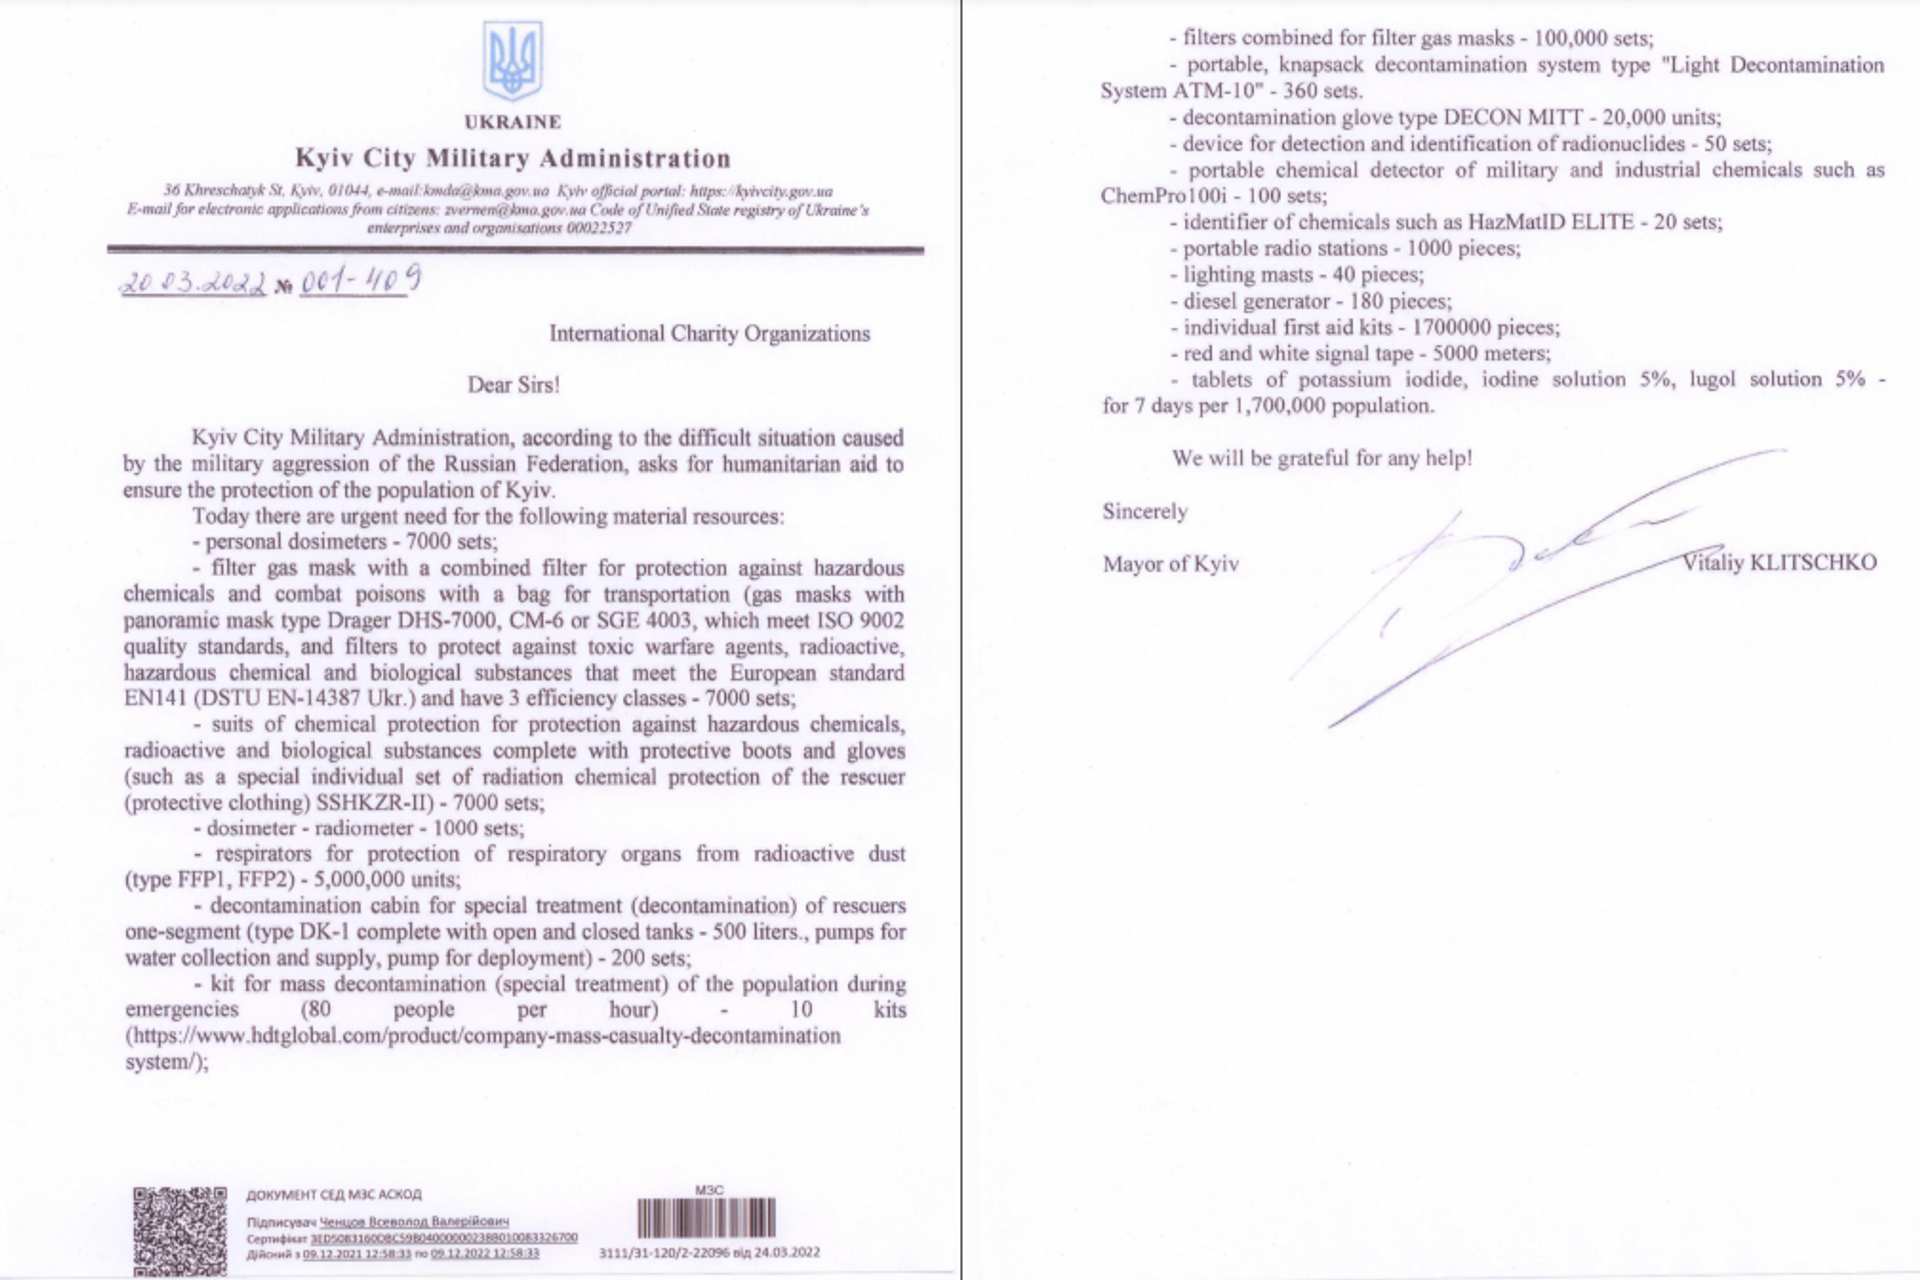 Letter from Mayor of Kiev Vitaliy Klitschko to International Charity Organizations dated 20 March 2022 requesting a range of equipment to protect against WMD attack. - Sputnik International, 1920, 11.05.2022